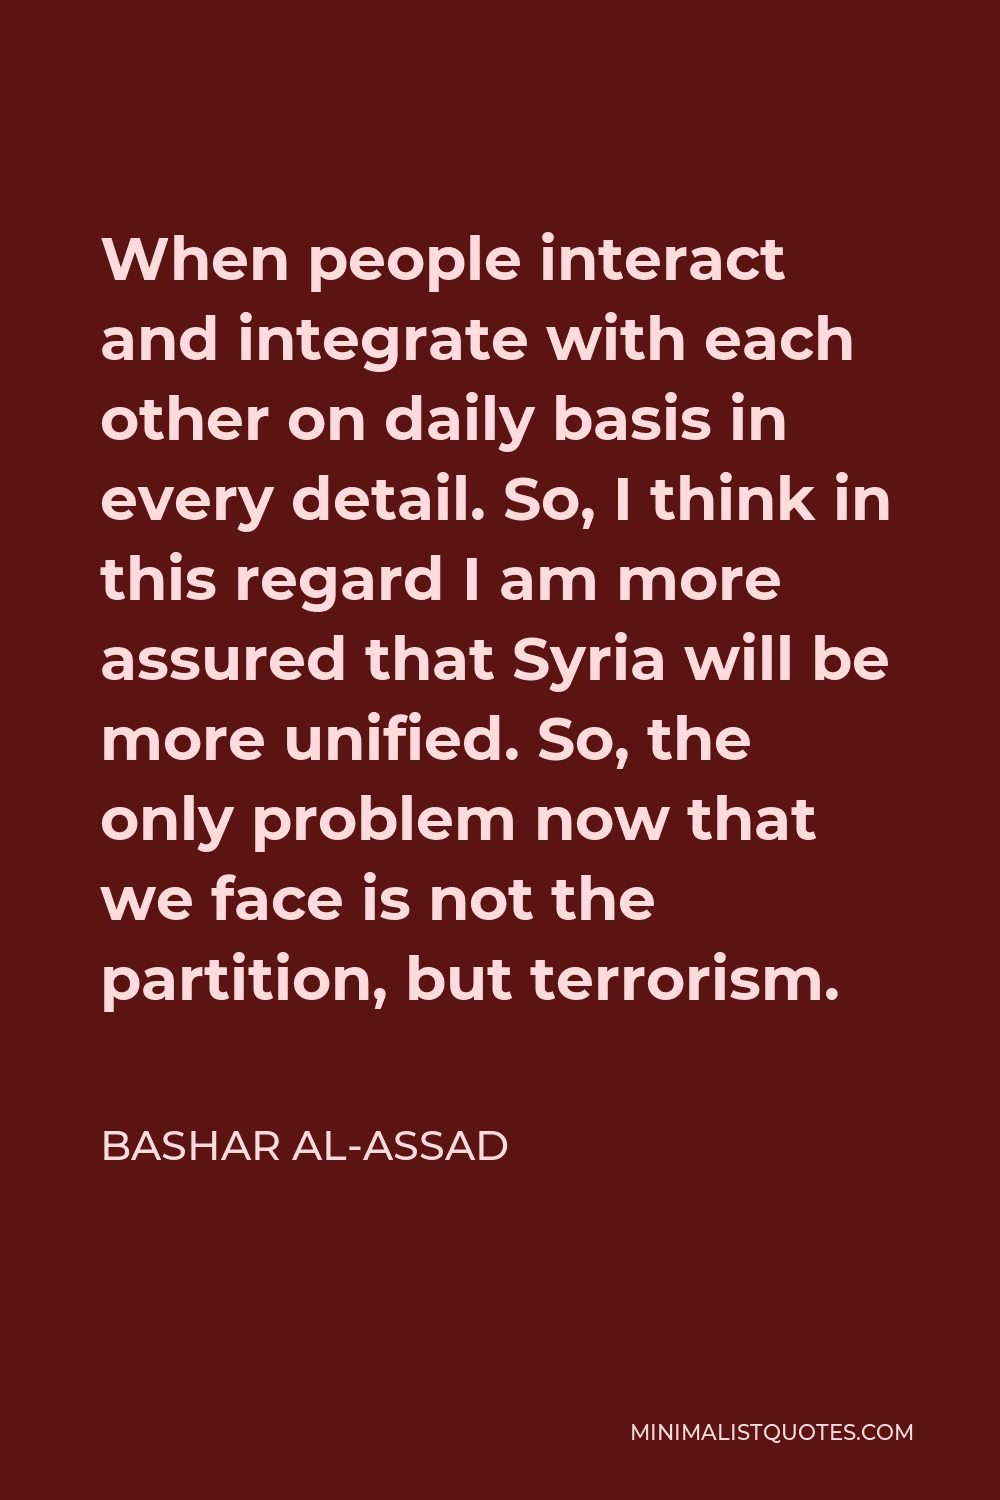 Bashar al-Assad Quote - When people interact and integrate with each other on daily basis in every detail. So, I think in this regard I am more assured that Syria will be more unified. So, the only problem now that we face is not the partition, but terrorism.